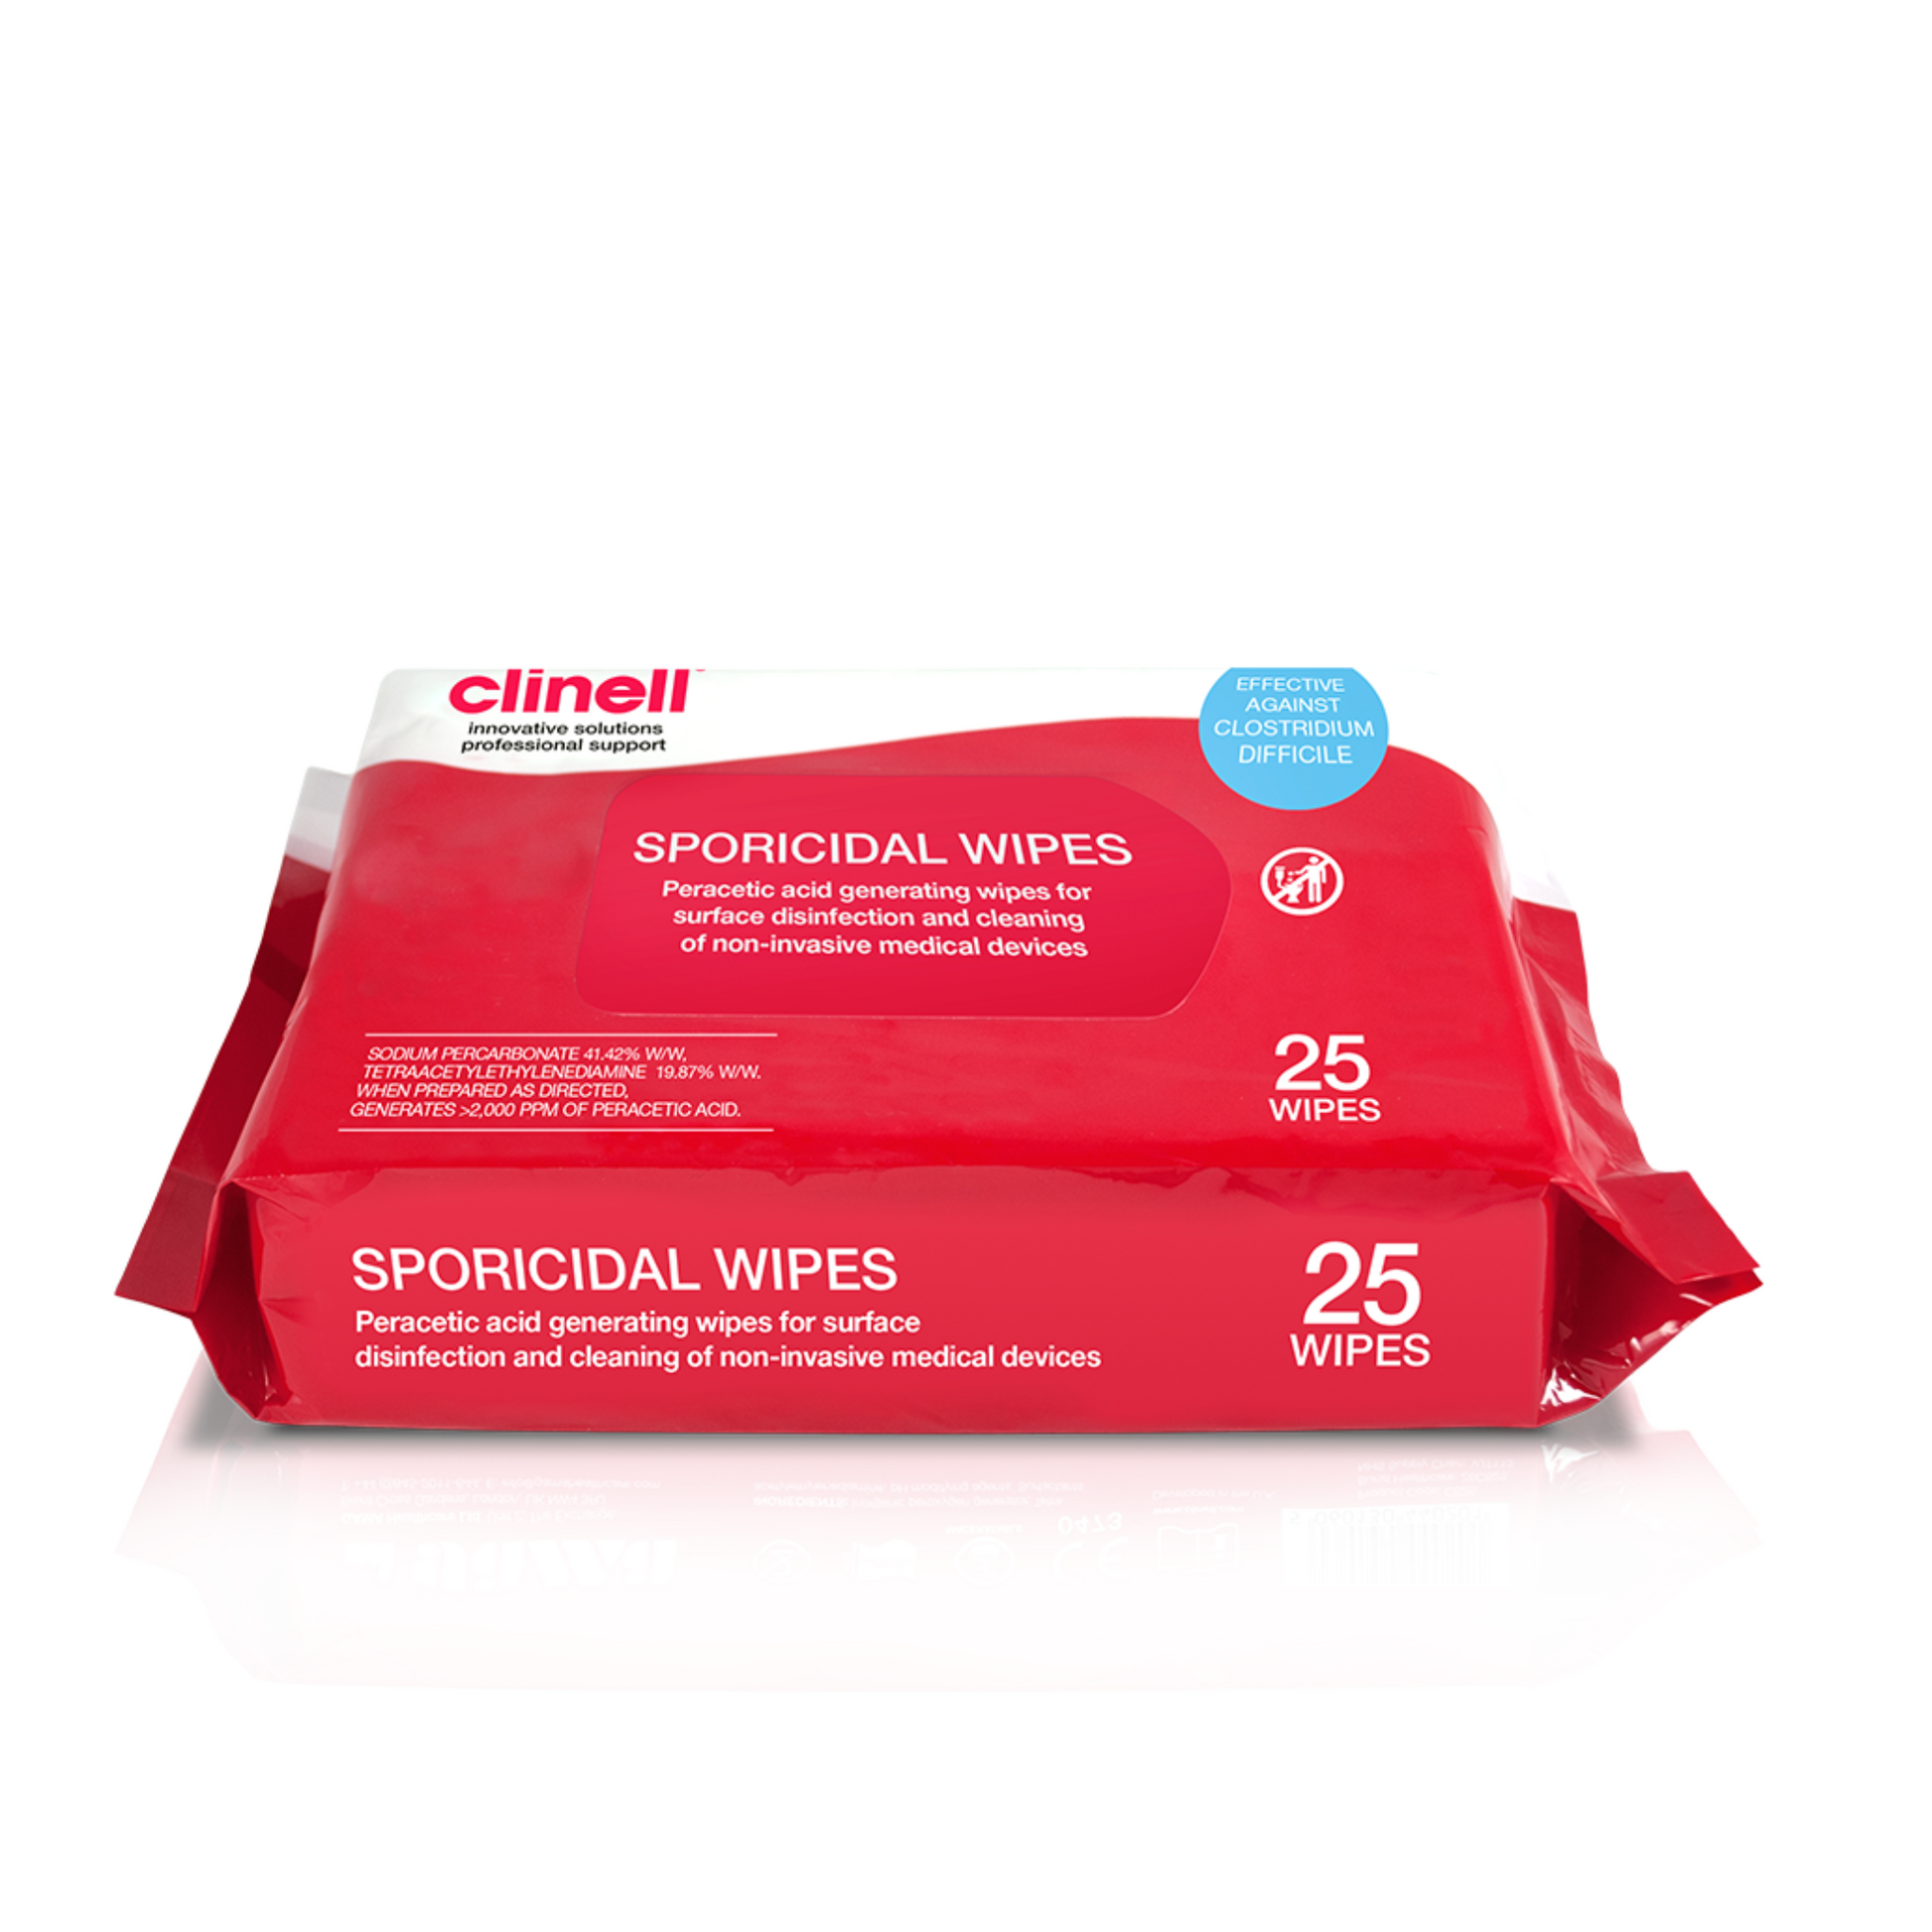 Clinell Sporicidal Wipes - Carton of 6